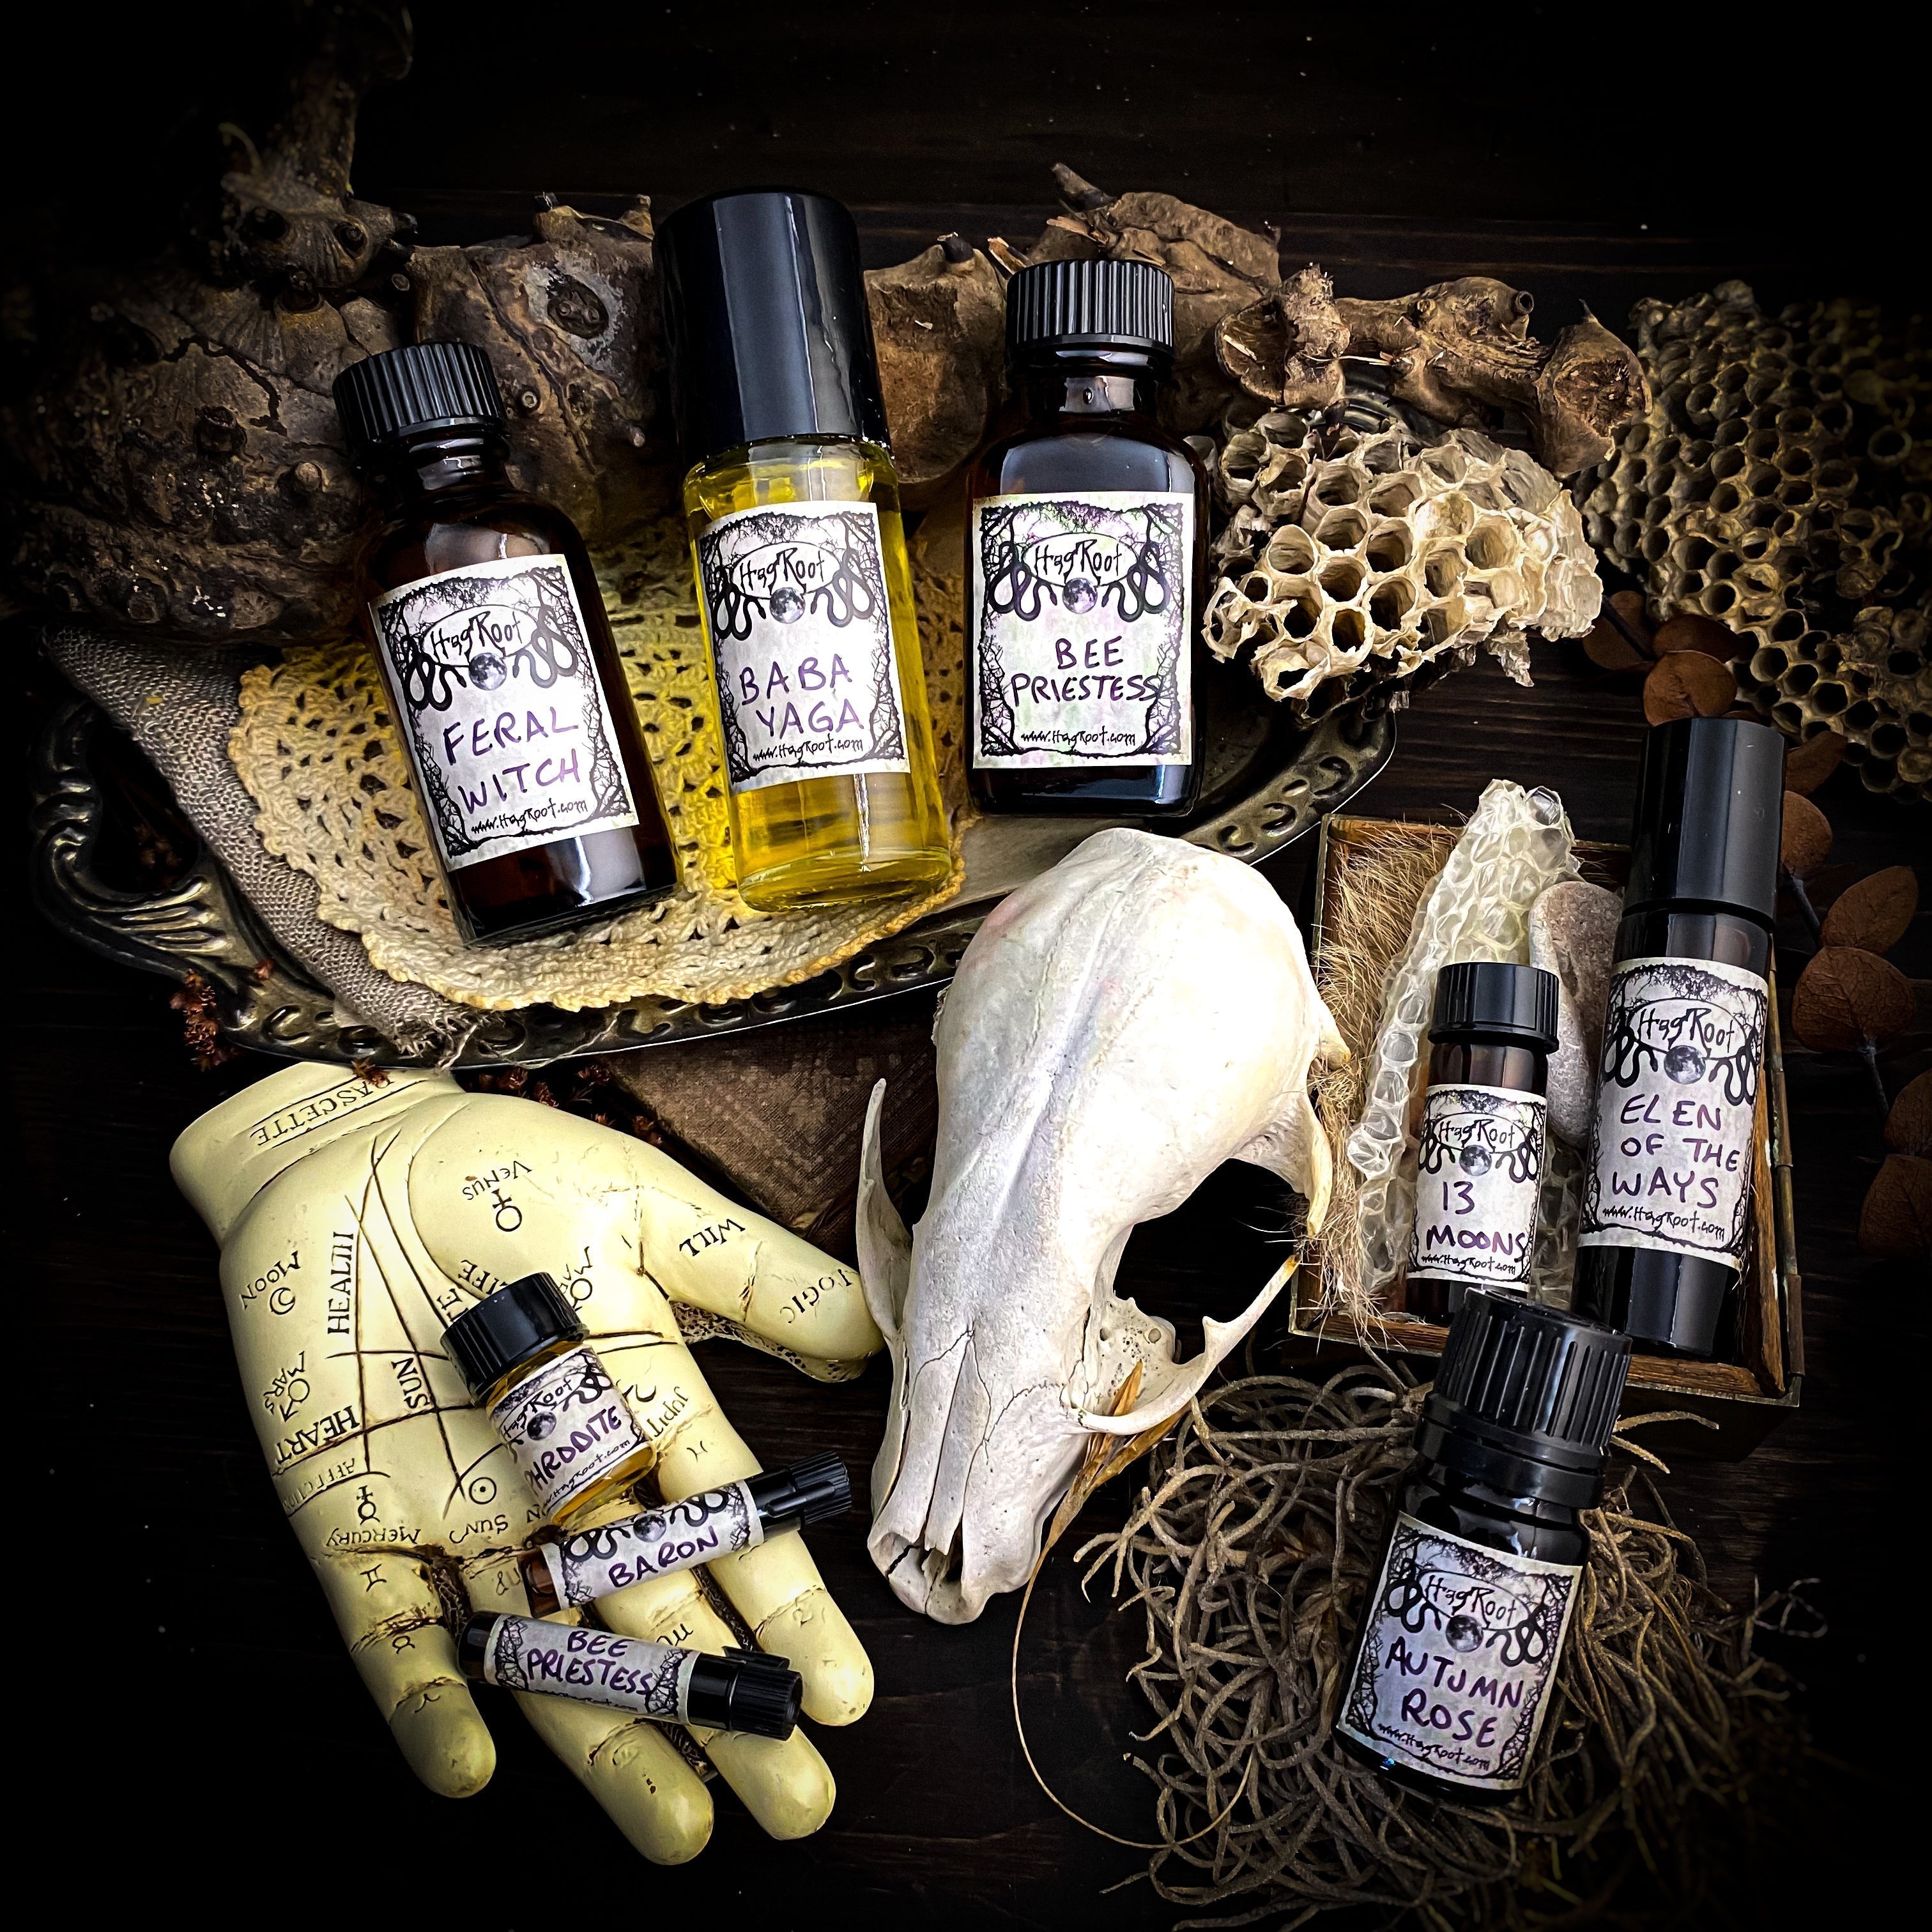 FOLK WITCH-(Evergreen Trees, Ceremonial Fire and Warm Spiced Bread)-Perfume, Cologne, Anointing, Ritual Oil